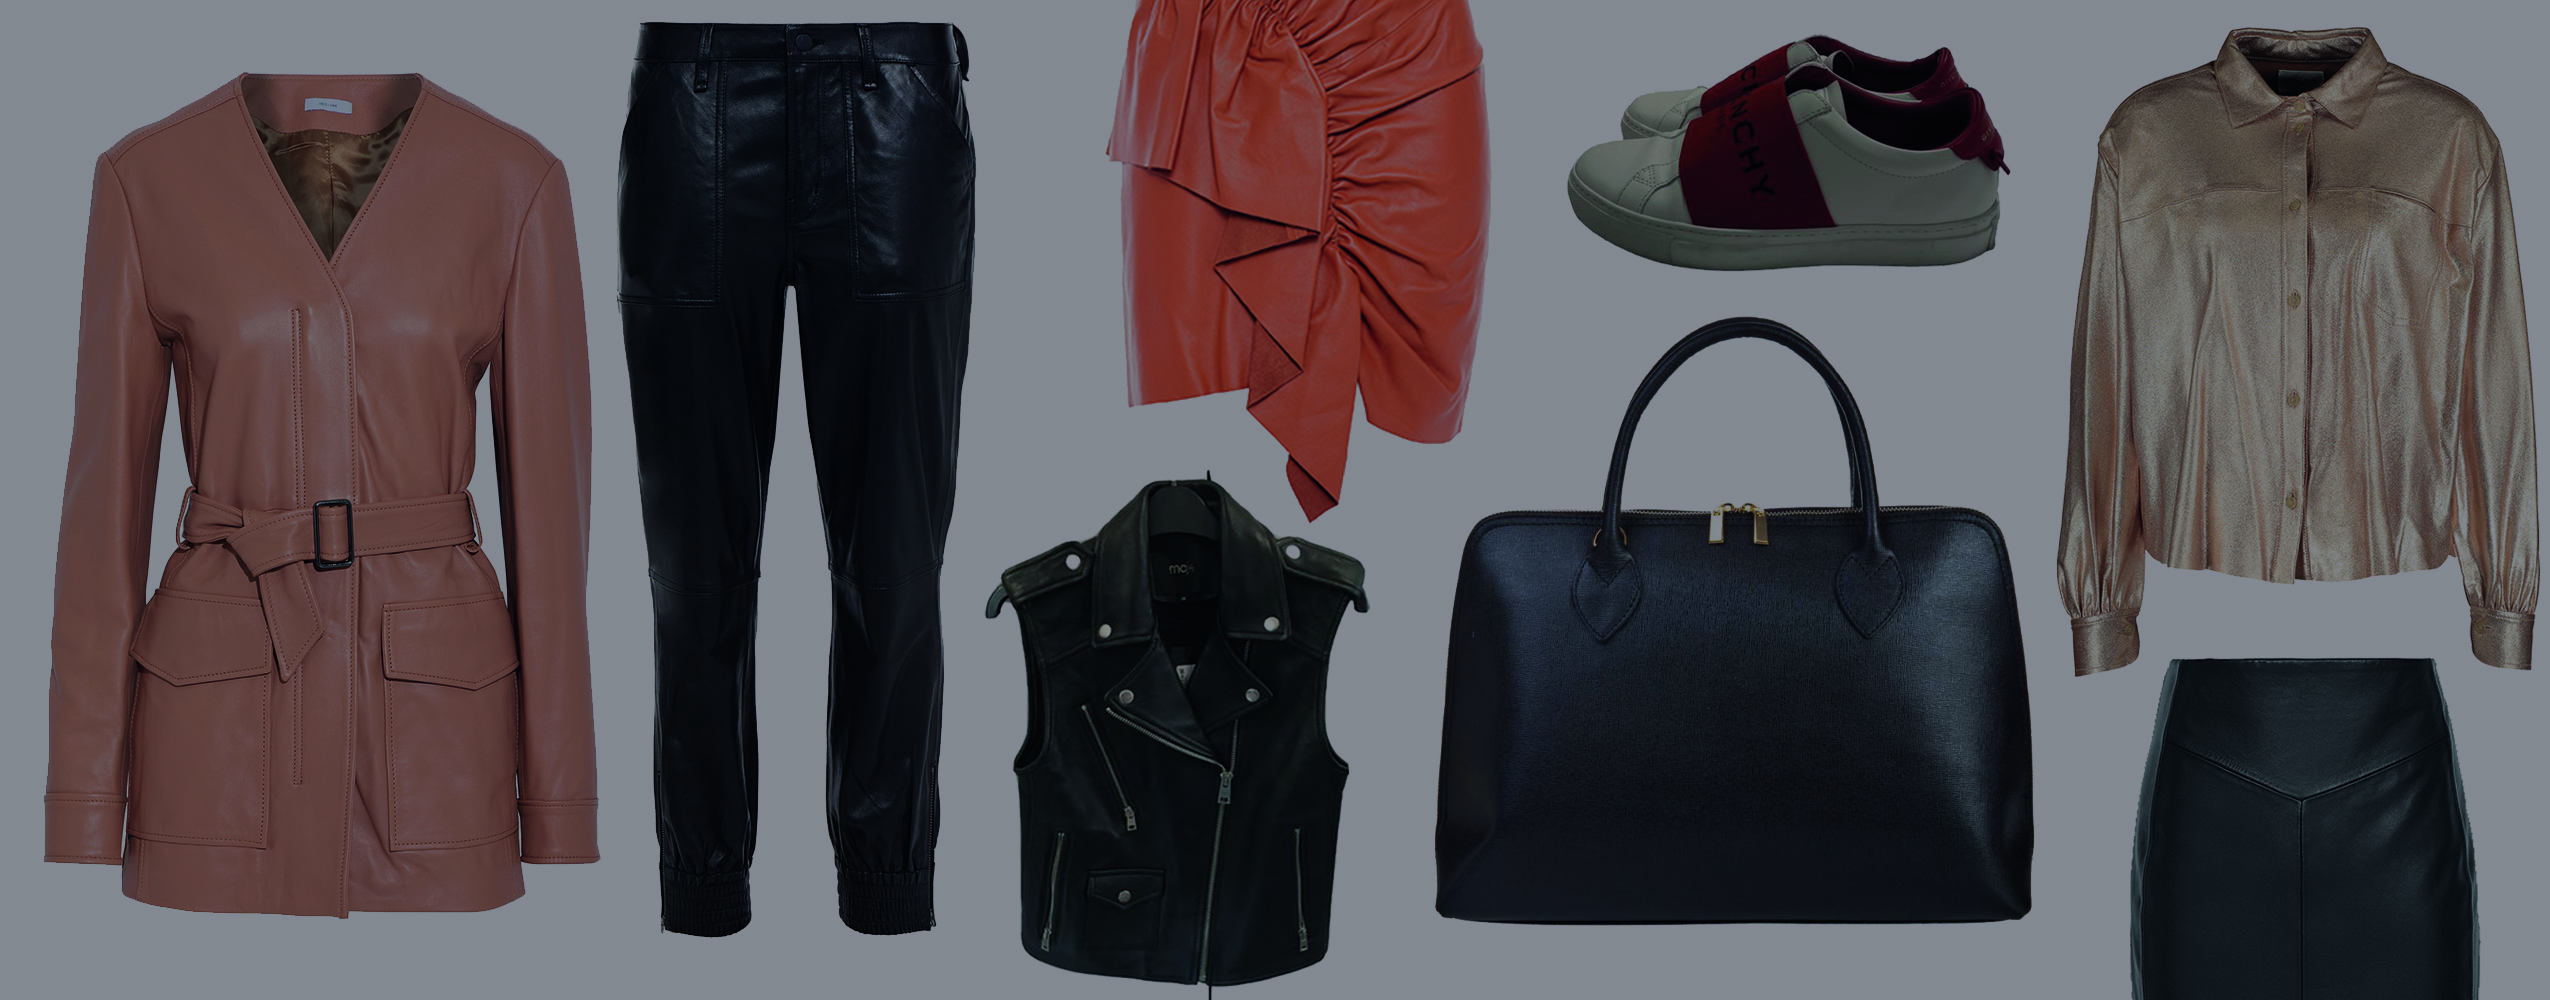 Four Ways to Get the Leather Look for Less